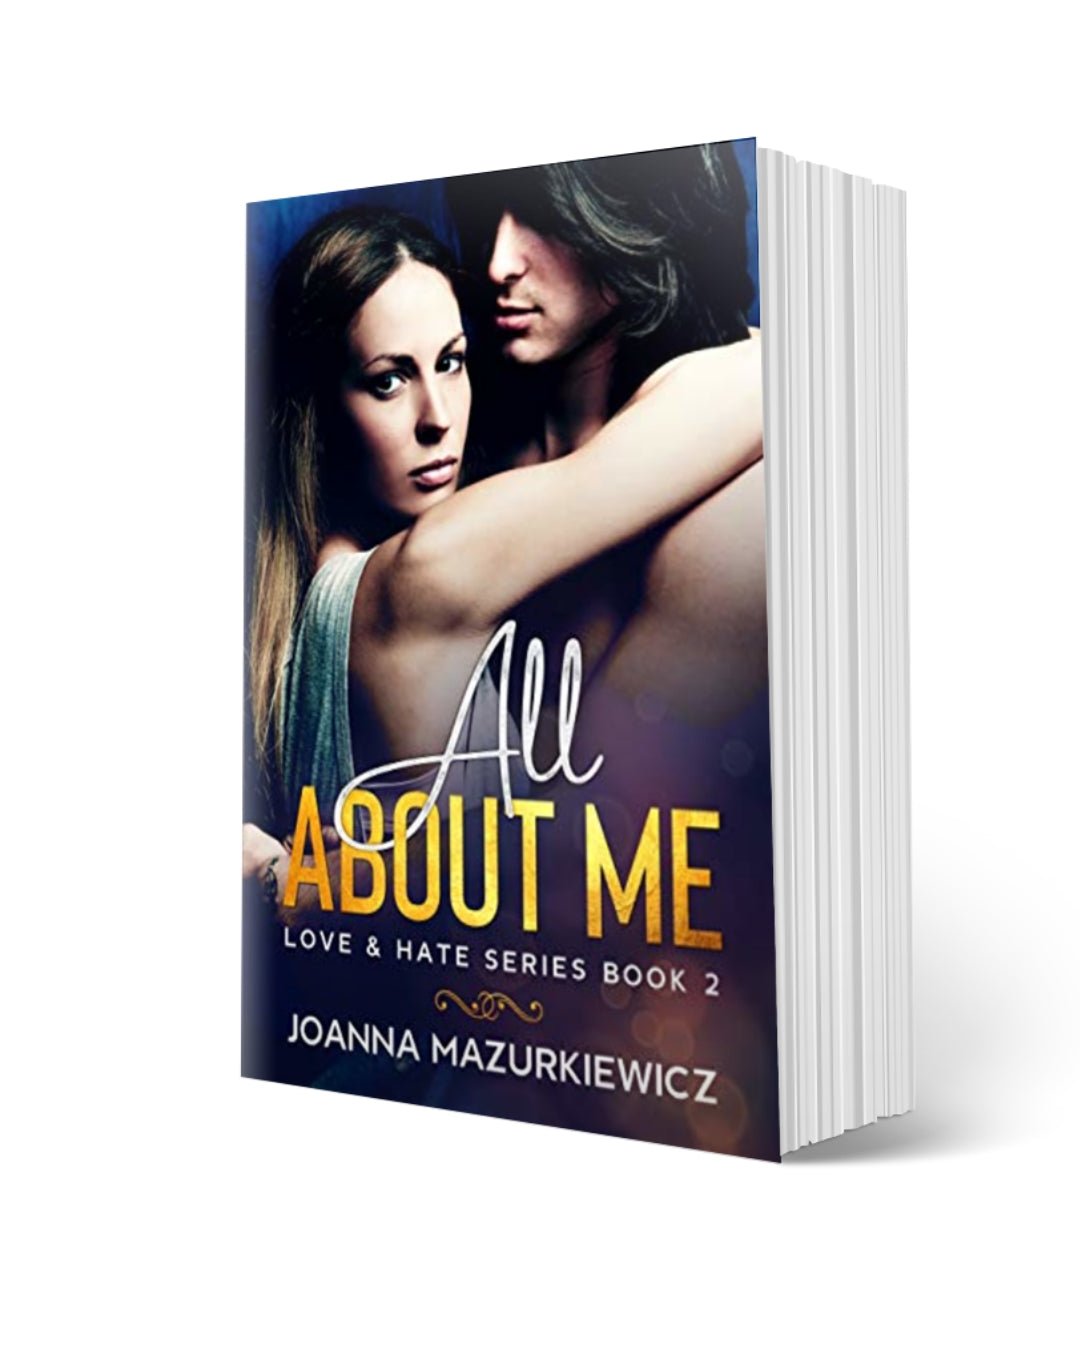 Paperback Copy of All About Me (Love & Hate Series Book 2) - JMazurkiewiczbookstore